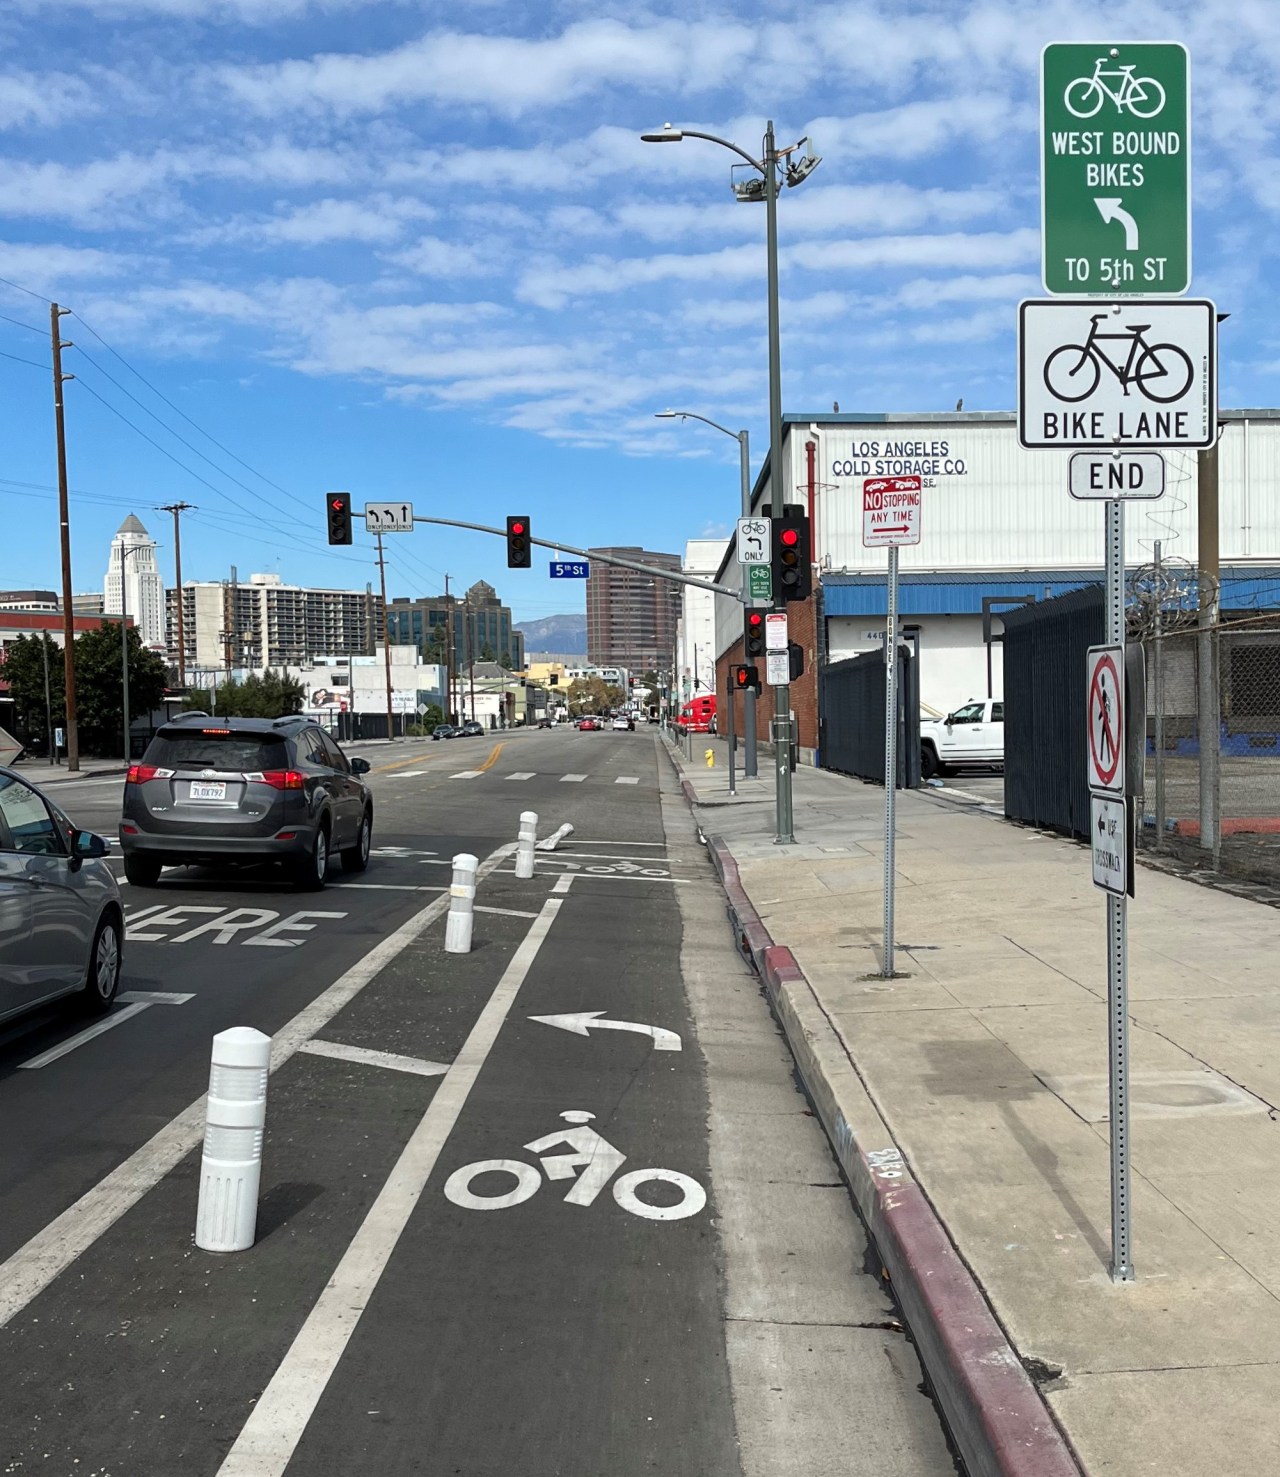 On Central Avenue, bikeway signage to get cyclists onto the 5th/6th one-way couplet